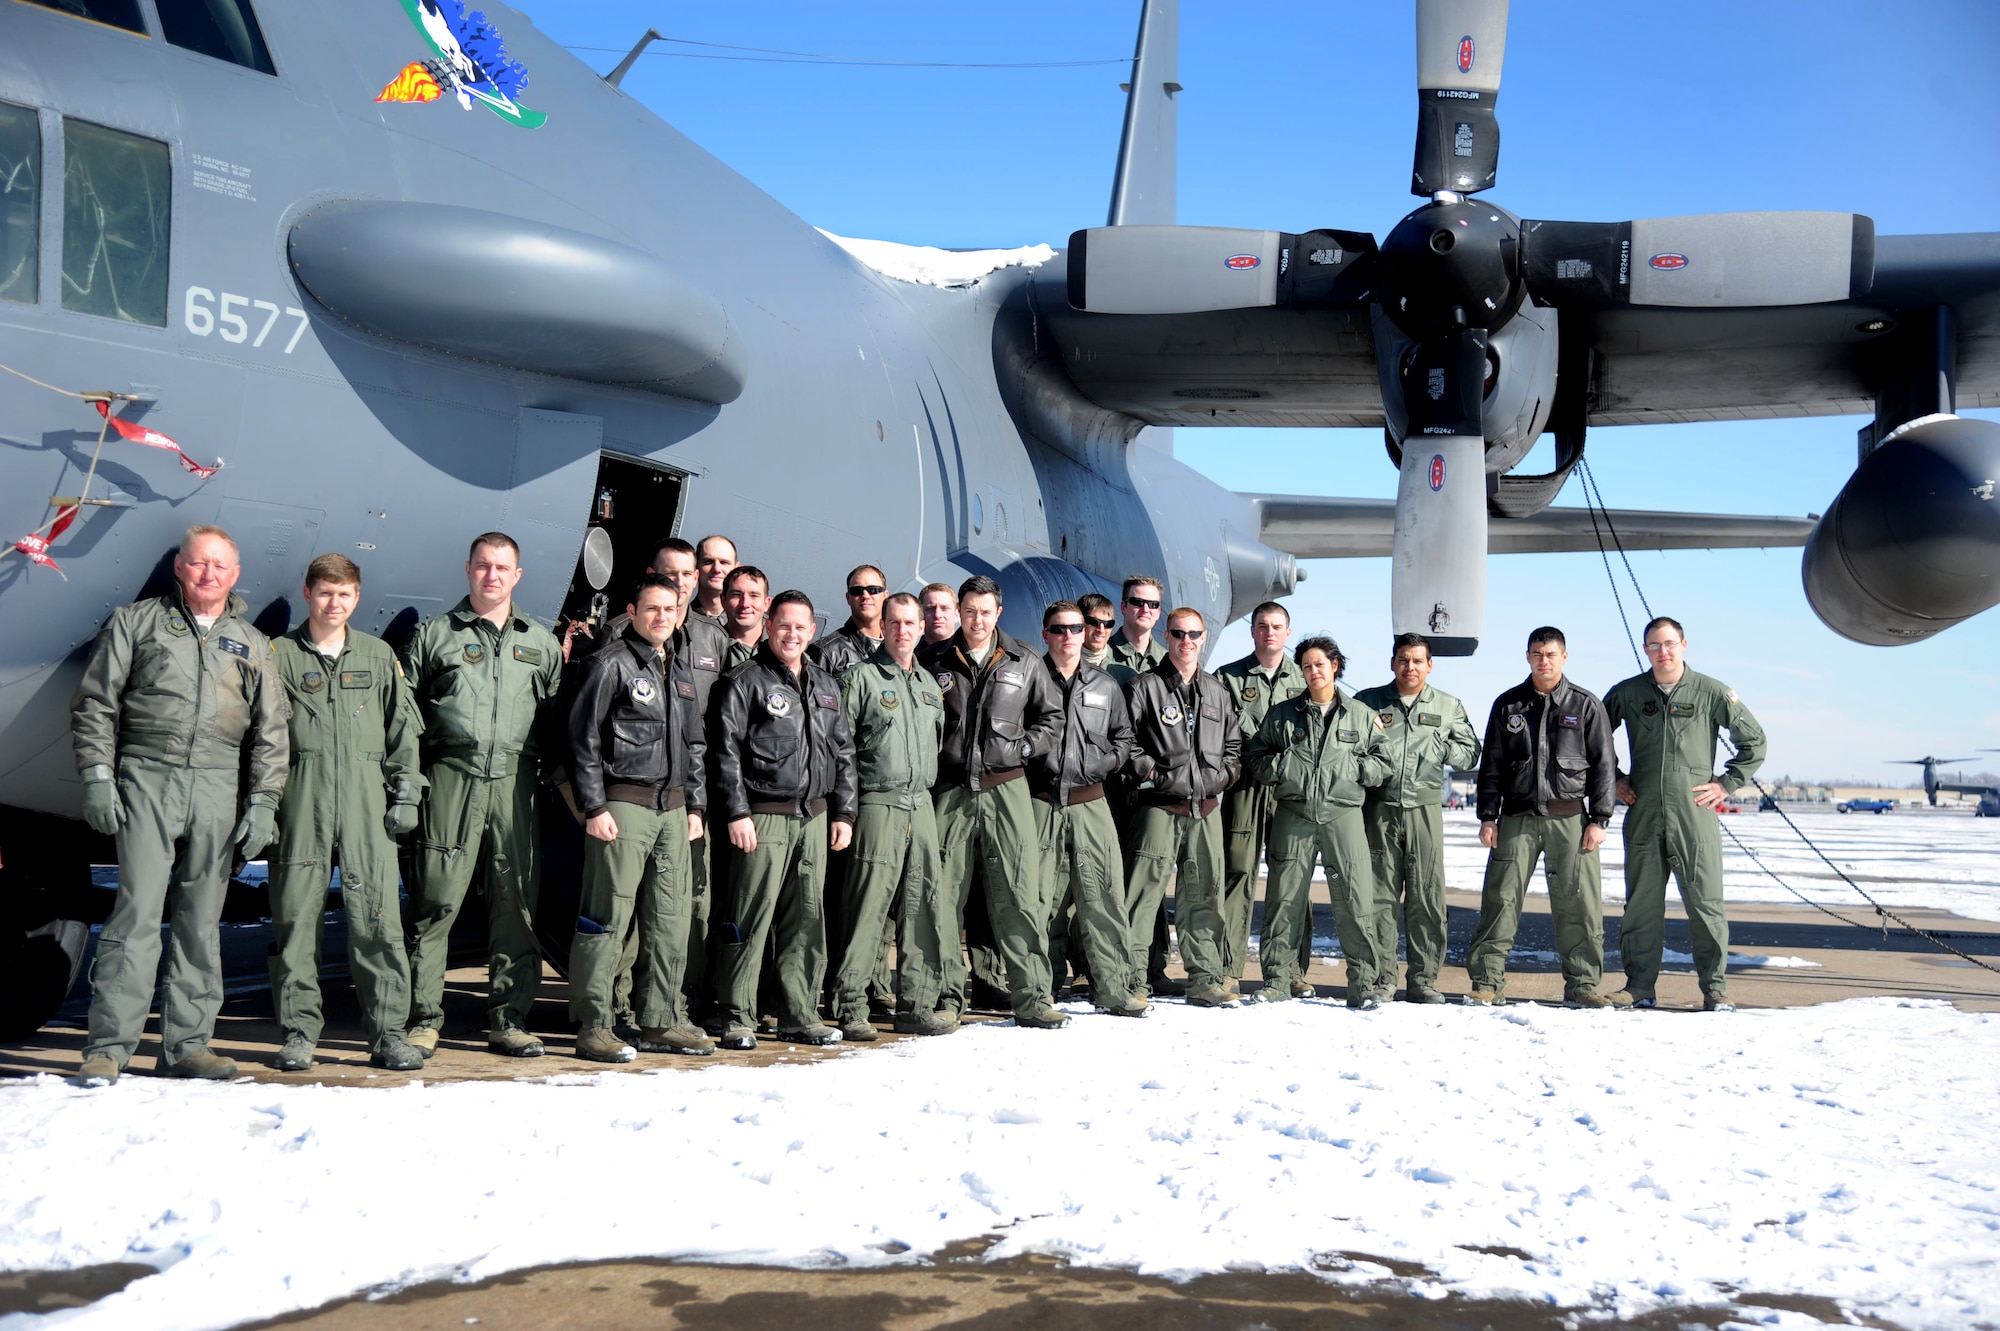 Members of the 16th Special Operations Squadron stand alongside their prized AC-130H Spectre gunship Feb. 2, 2014 at Cannon Air Force Base, N.M. As this aircraft is sent into retirement, the sensor operators bid farewell to an aerial asset that has not only served its country proud, but leaves a lasting American Legacy to future generations. (U.S. Air Force Photo/Airman 1st Class Chip Slack)